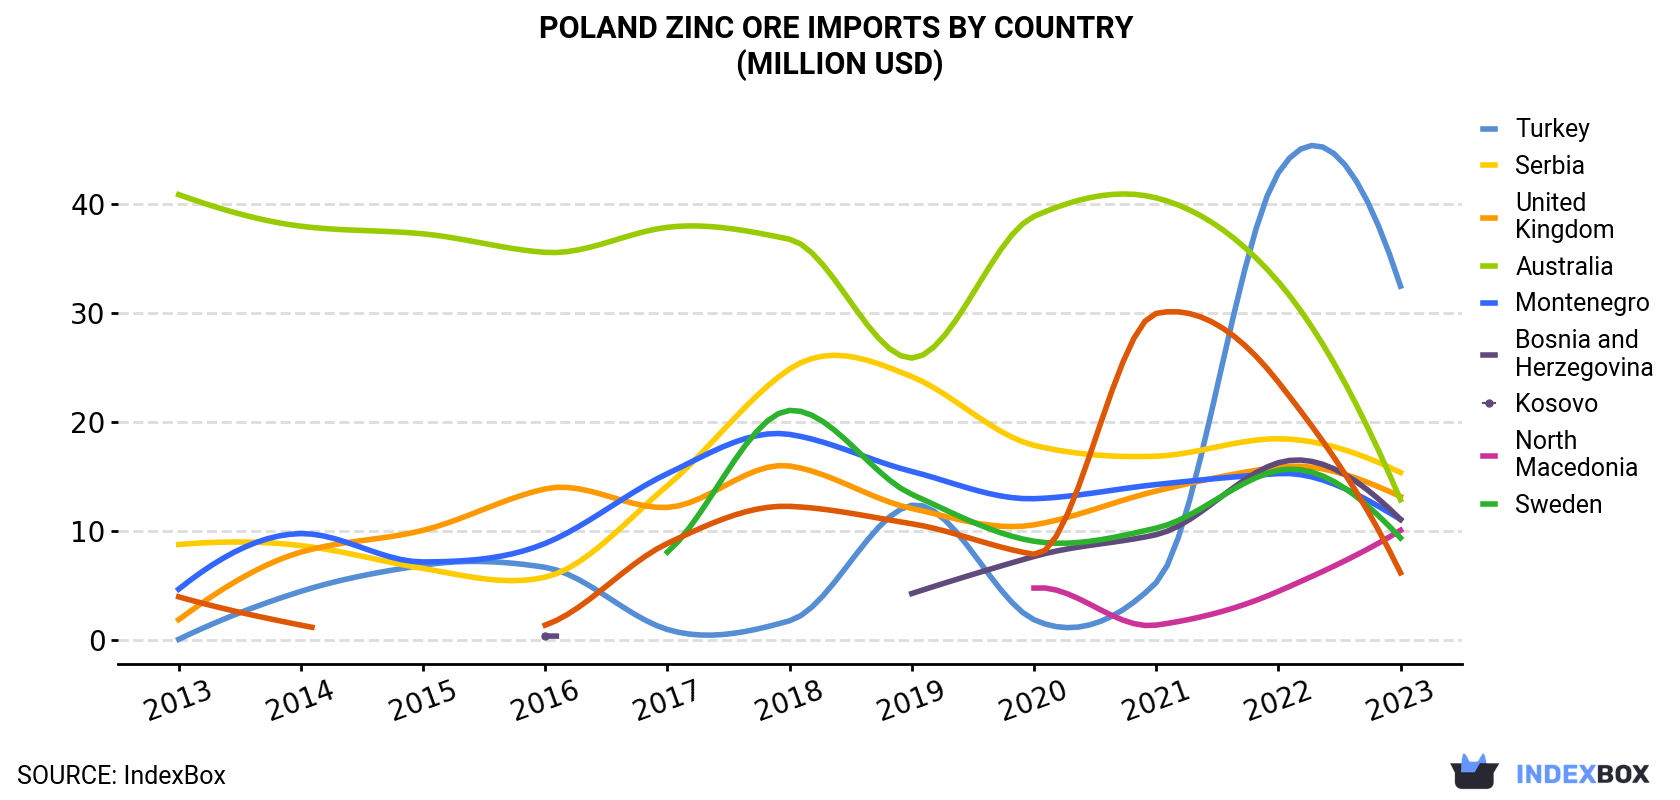 Poland Zinc Ore Imports By Country (Million USD)